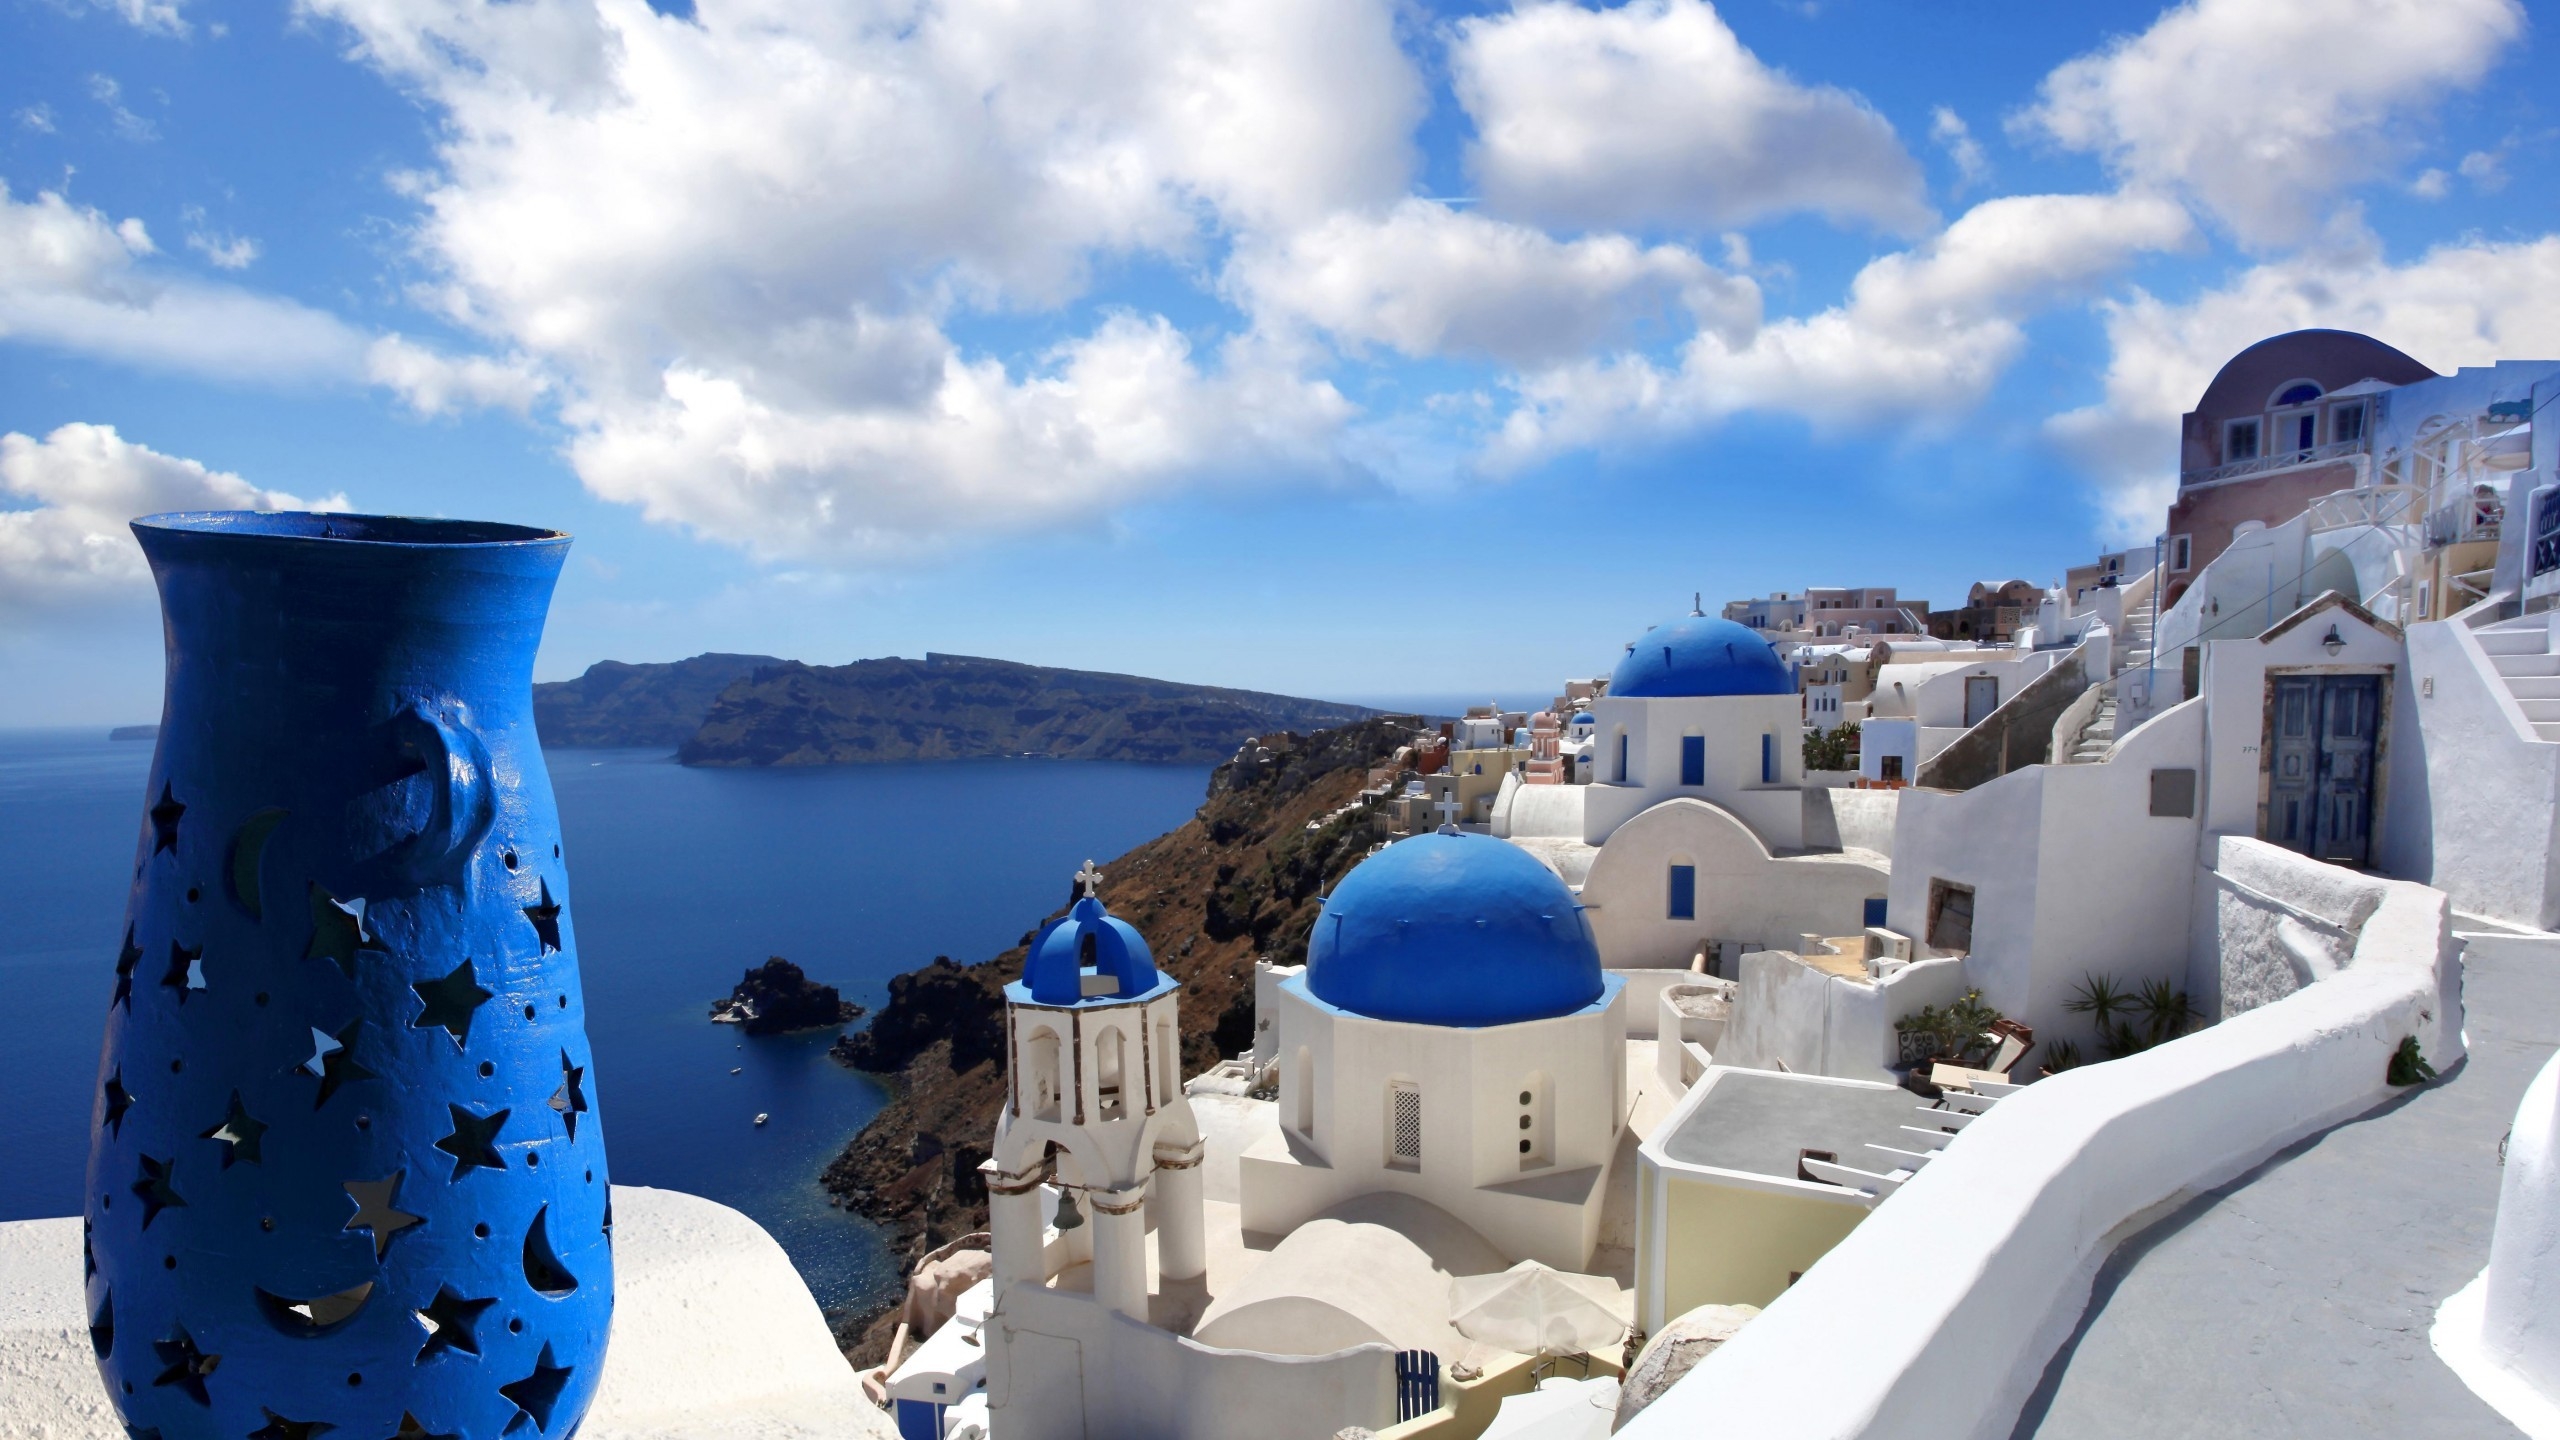 Ideal View from Santorini for 2560x1440 HDTV resolution